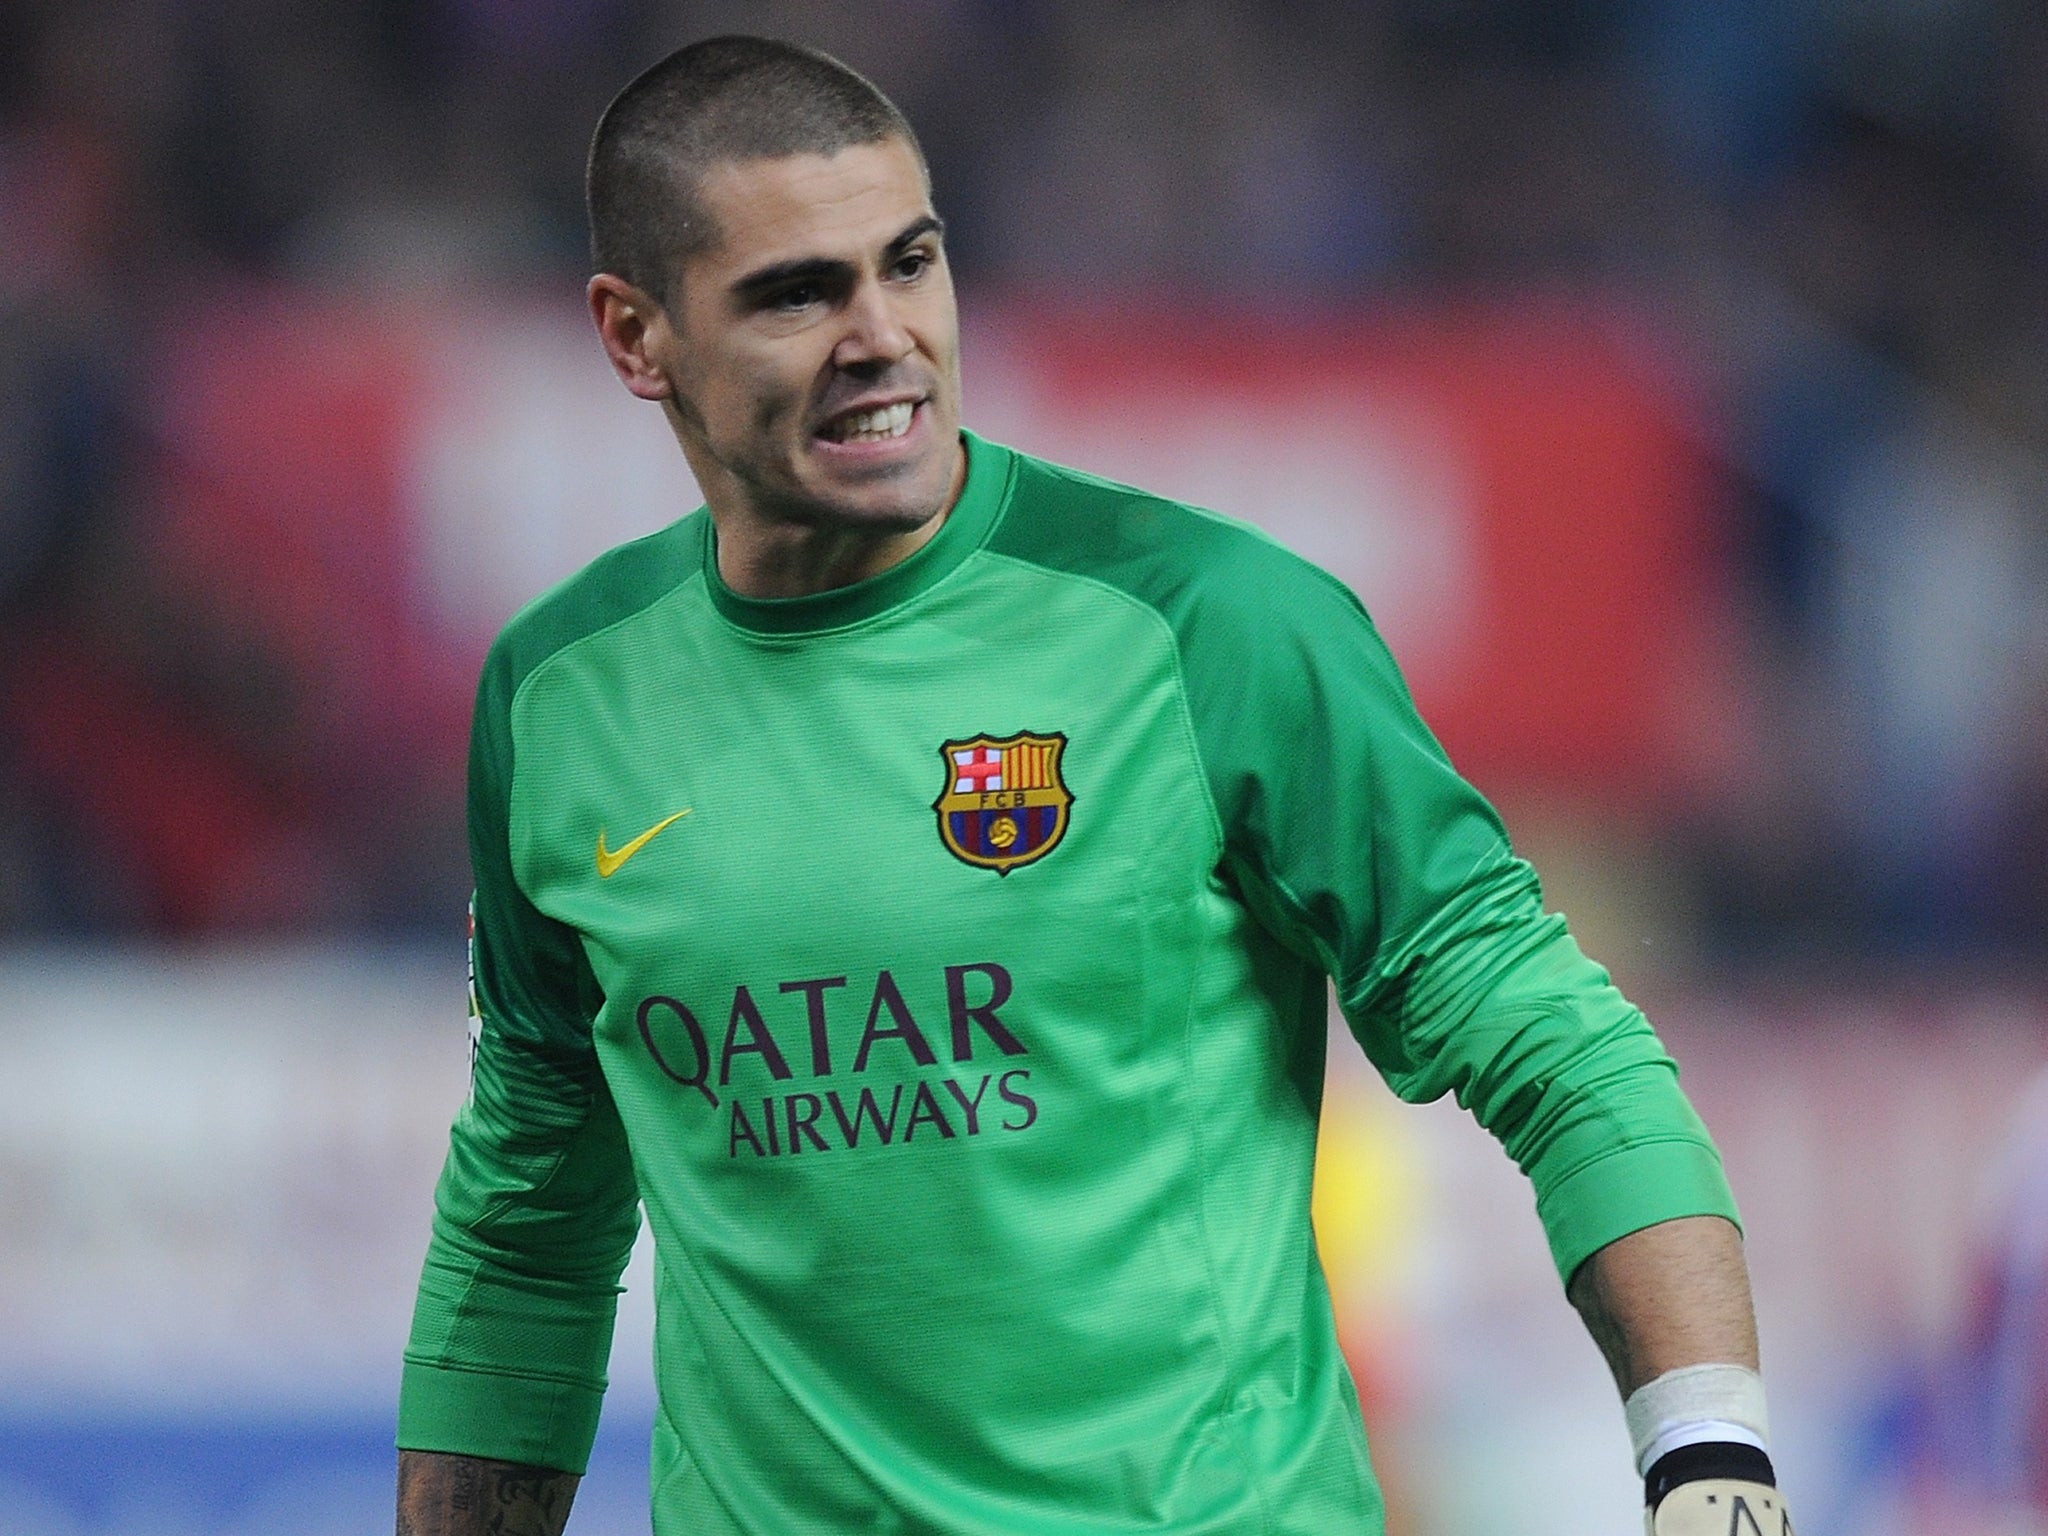 United’s manager, Louis van Gaal, gave Victor Valdes his Barcelona debut as a 20-year-old in 2002